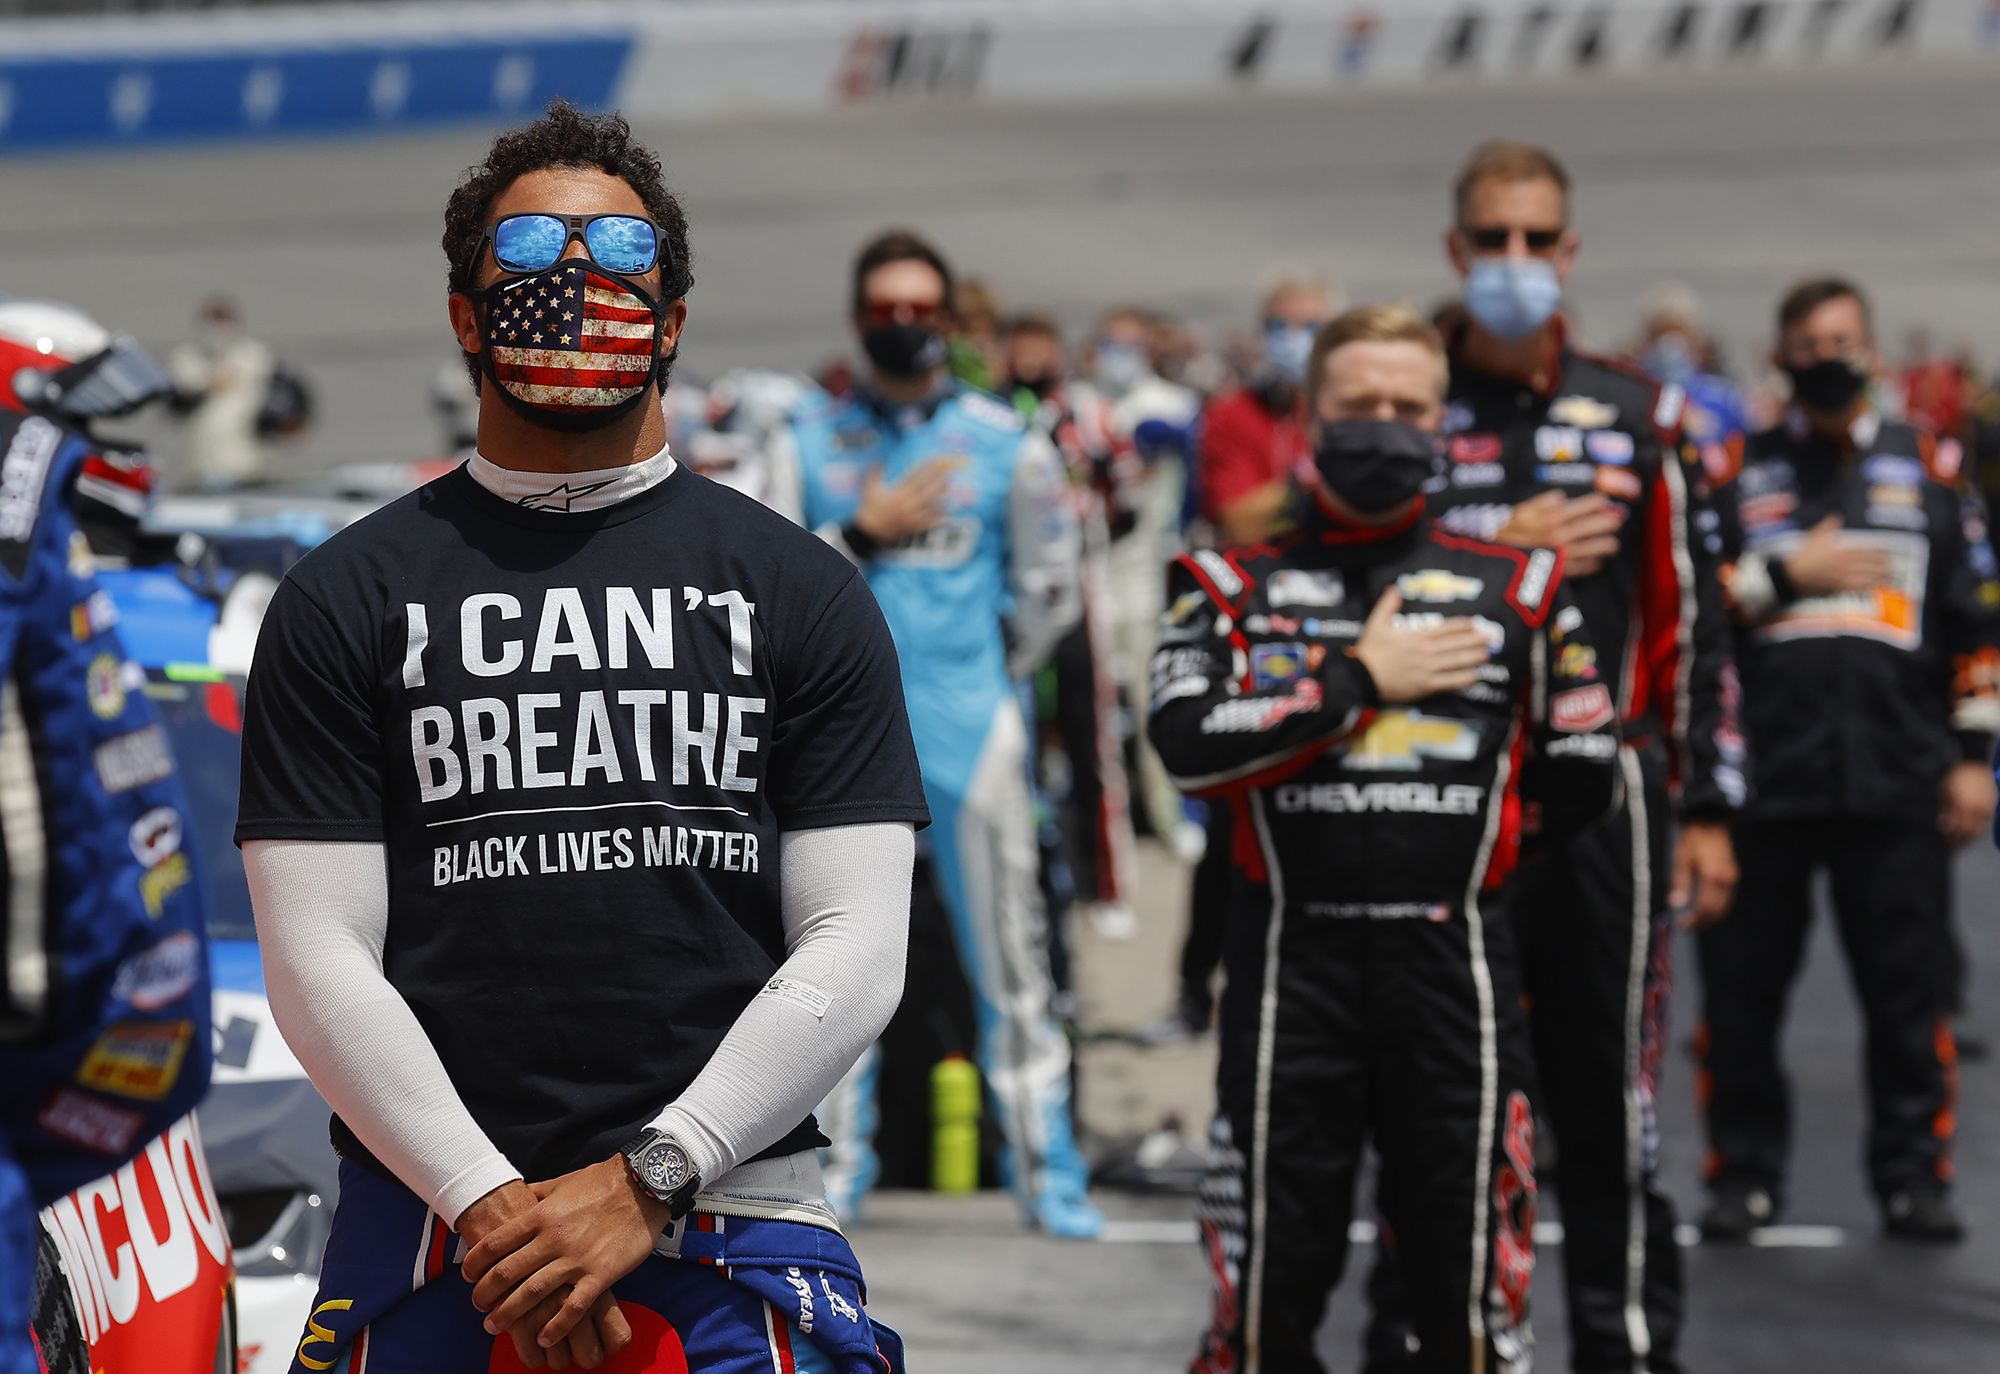 Nascar S Bubba Wallace Finds Fuel To Speak Out More The Boston Globe